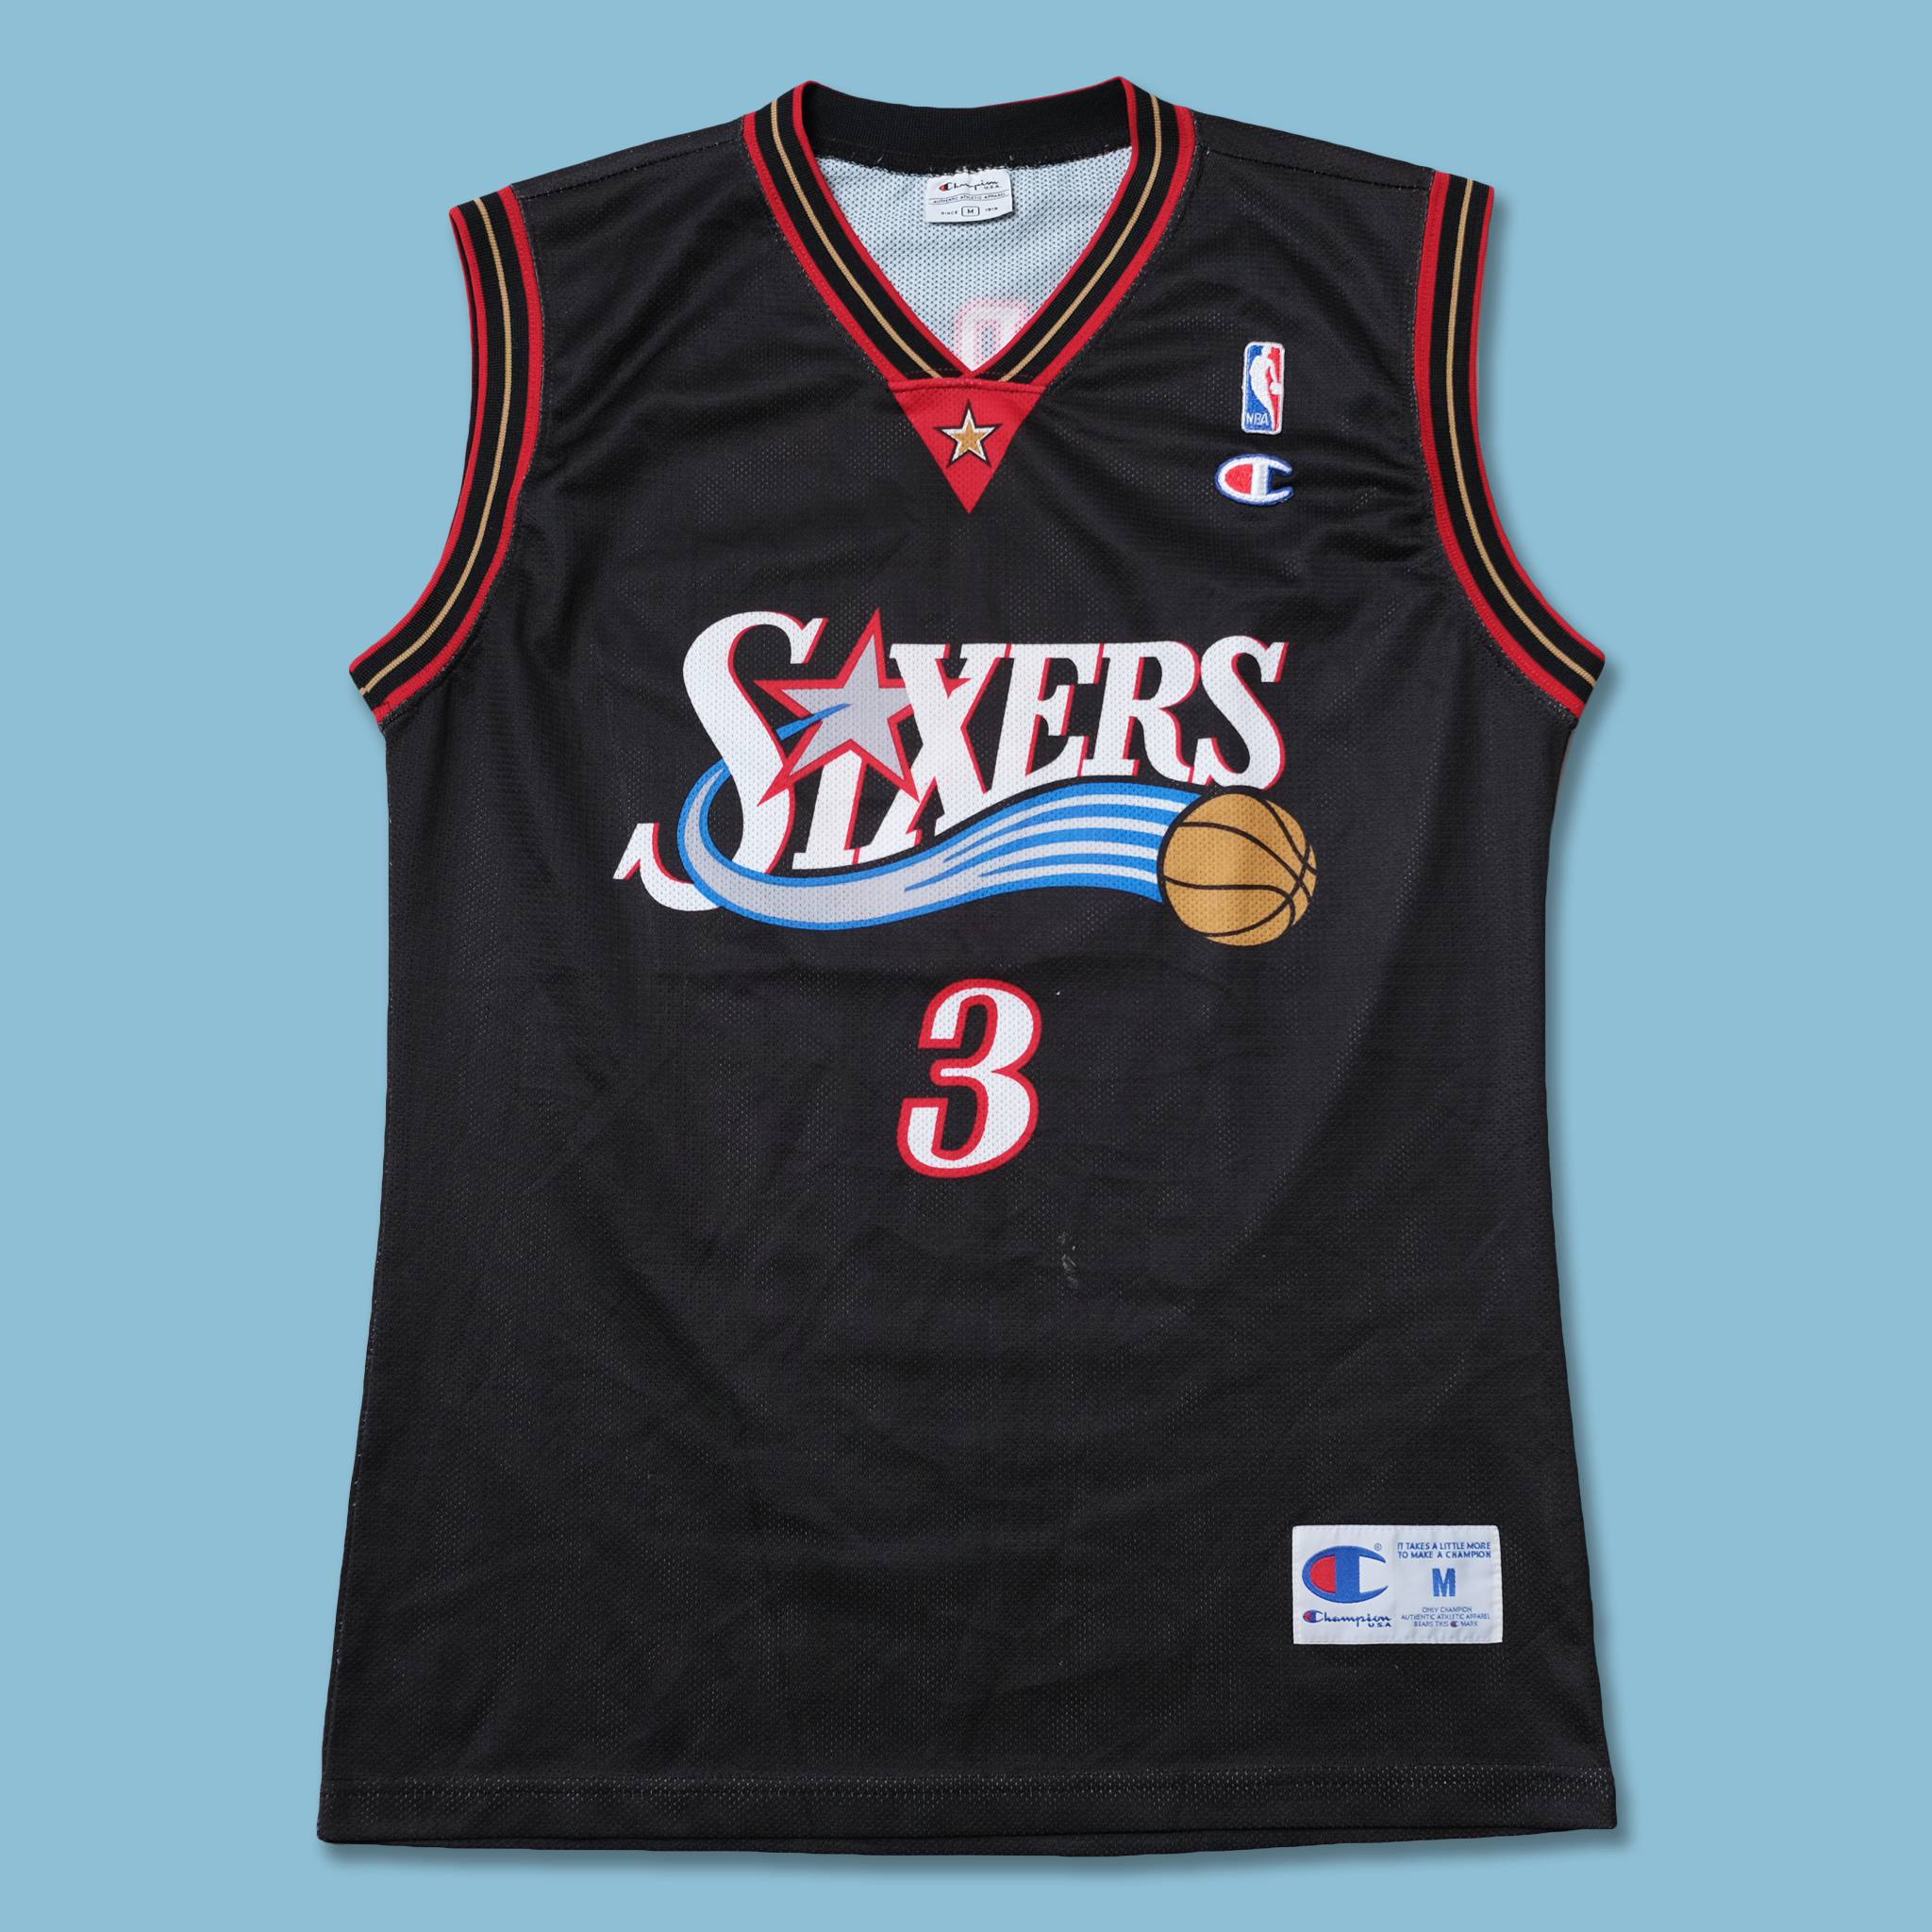 men Allen Iverson Nats Jersey, Stitched #3 Allen Iverson Syracuse Nats  Throwback Retro Hardwood Classics Red Jersey - AliExpress